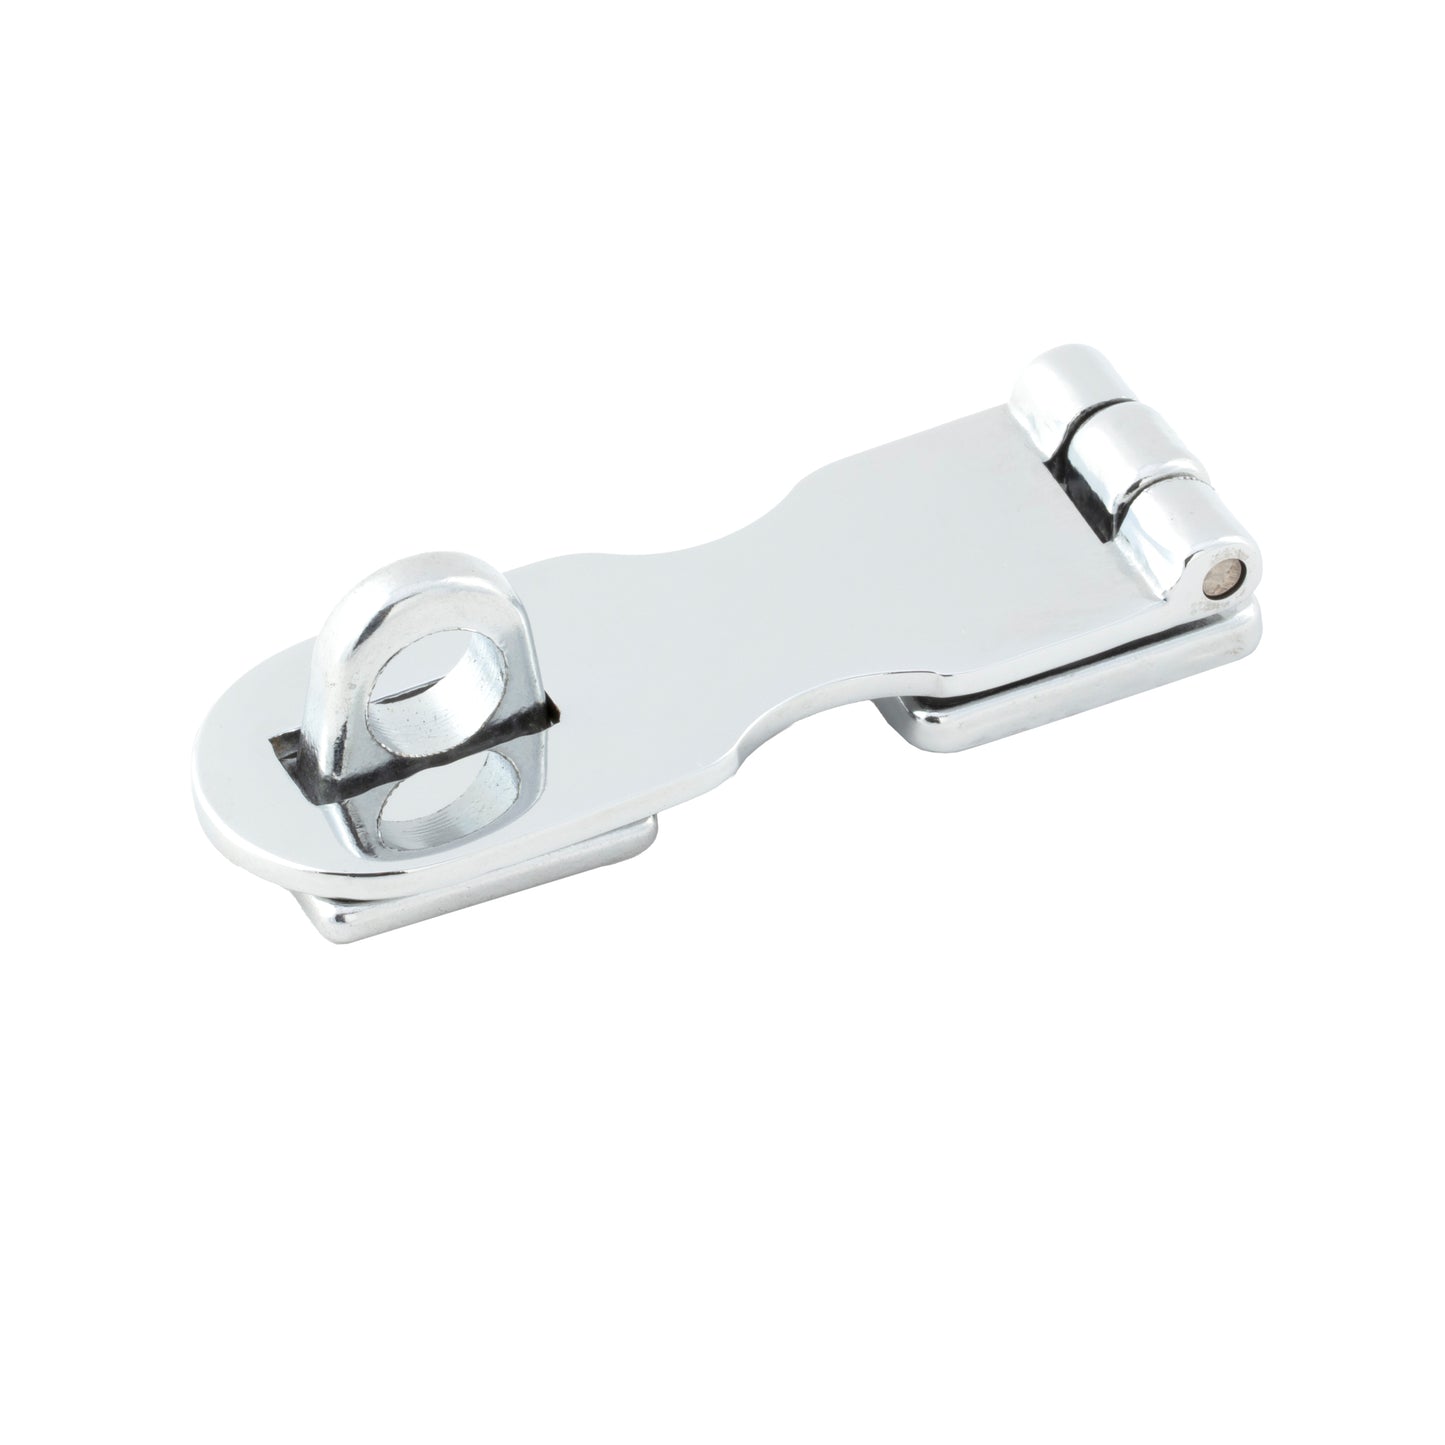 Fixed Safety Hasp (1" x 3") - S-4052